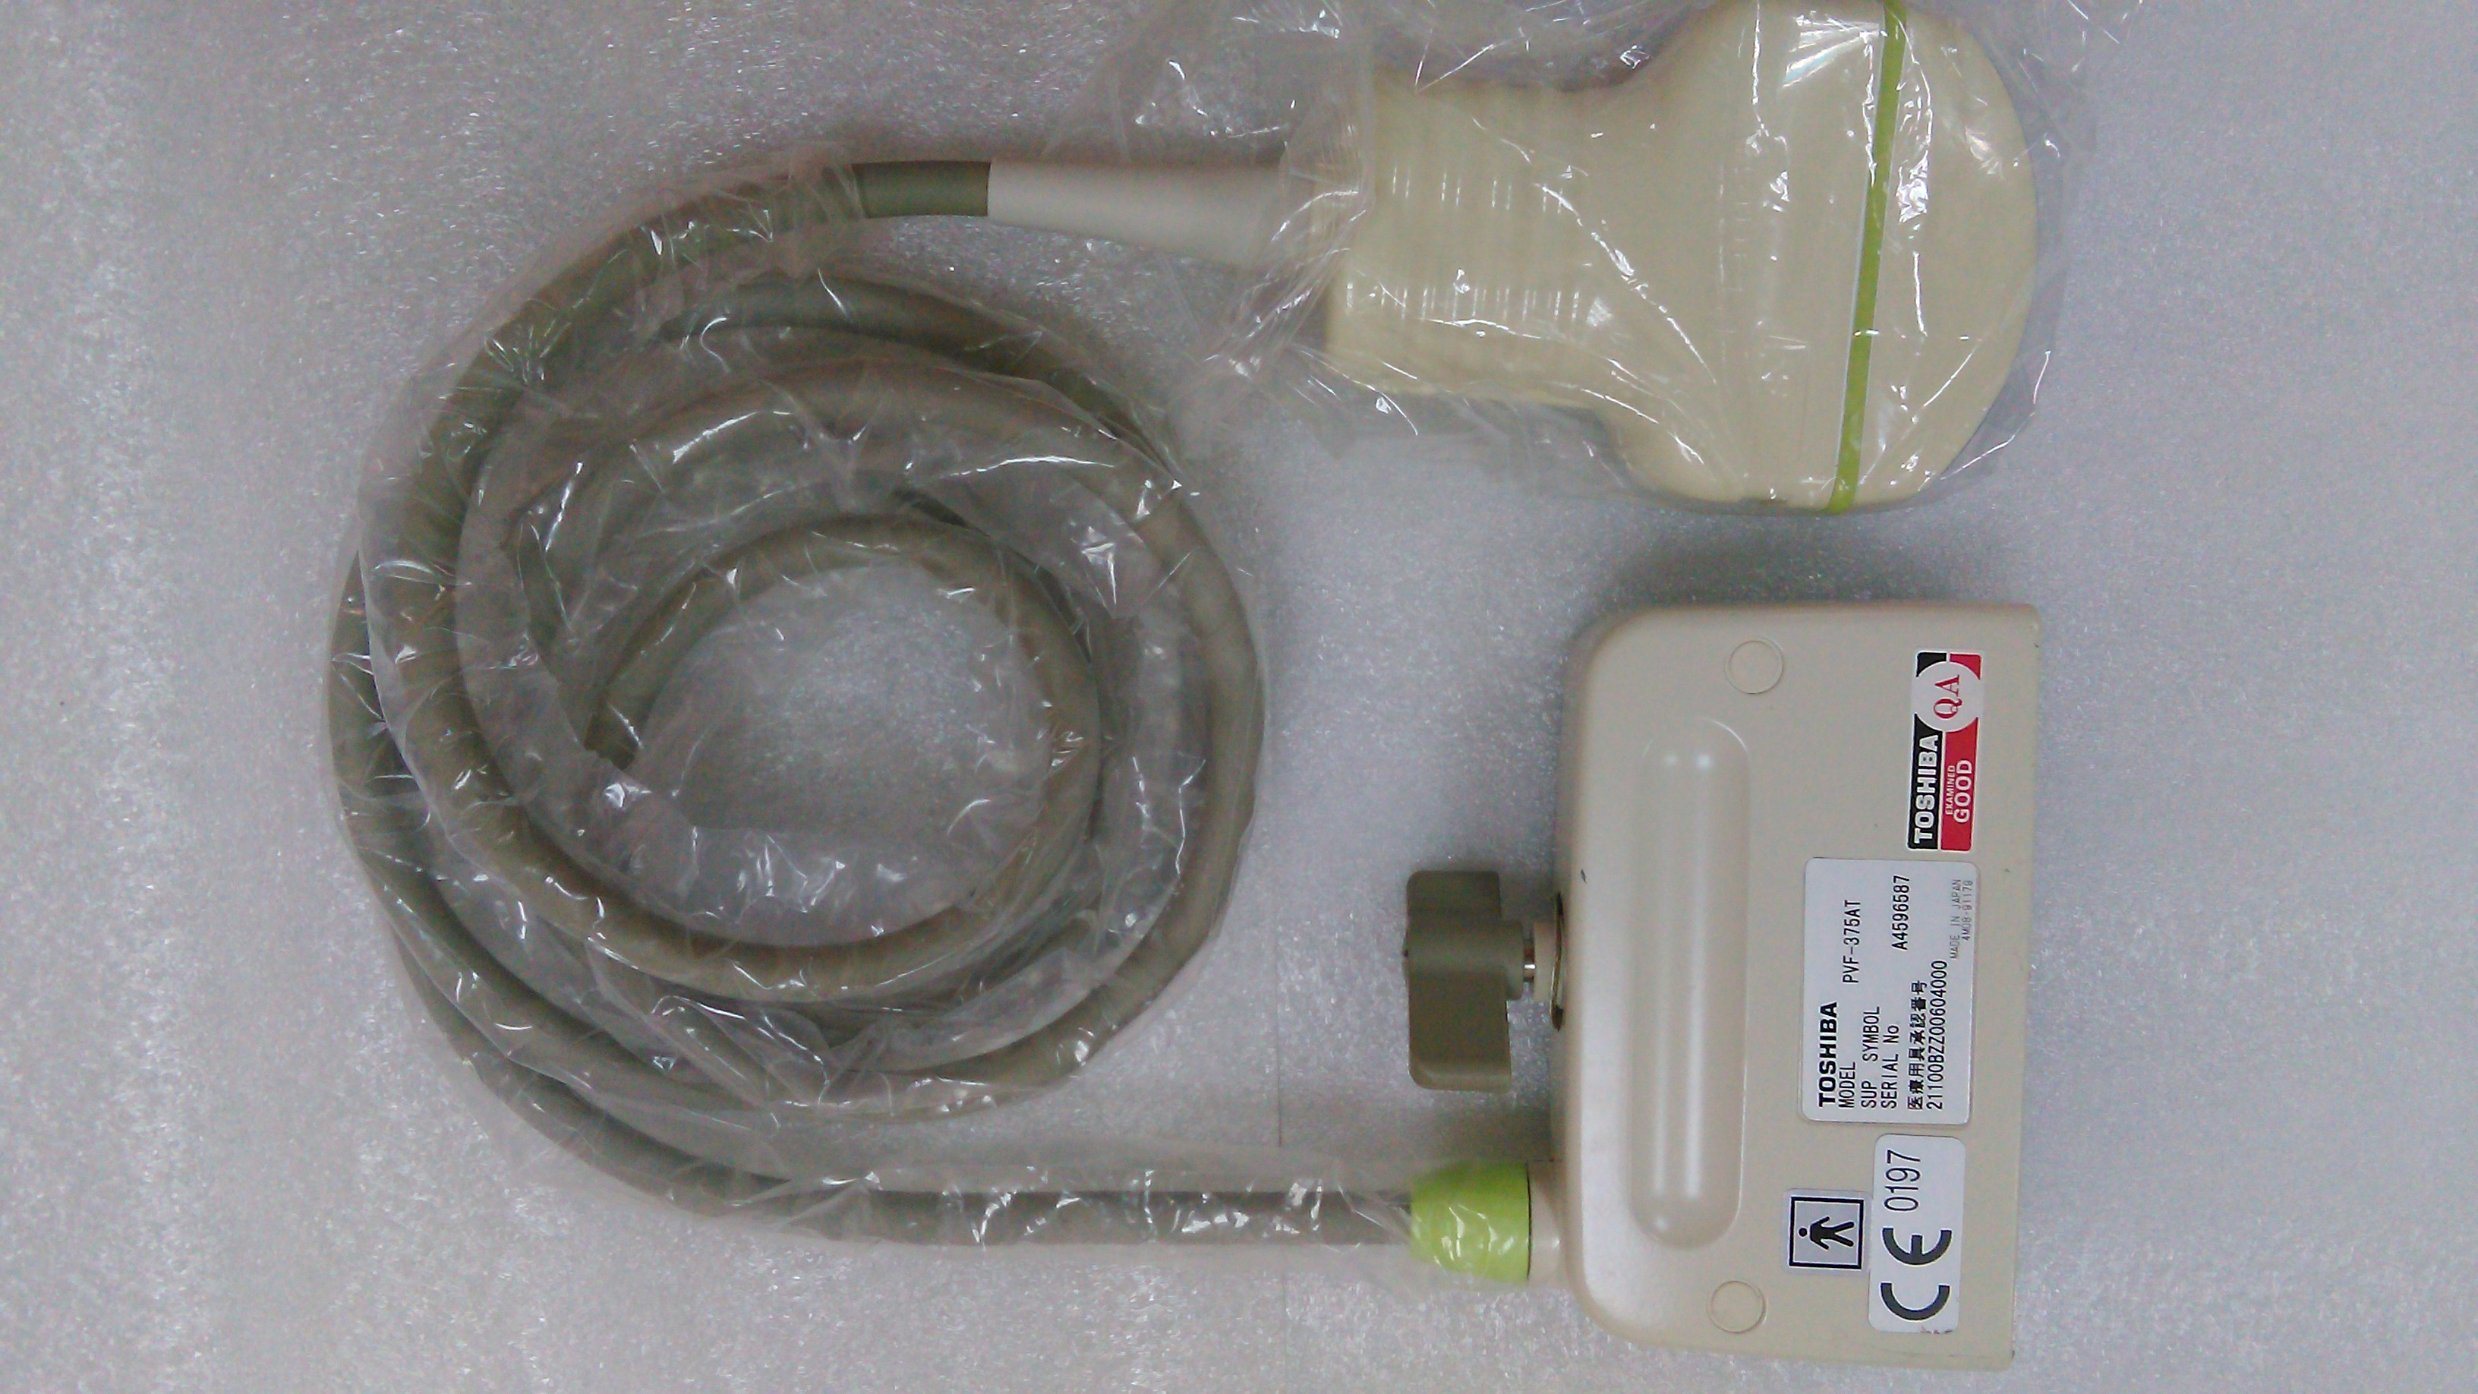 Original Used Ultrasound Transducer Excellent Toshiba Pvf-375at Ultrasound Probe